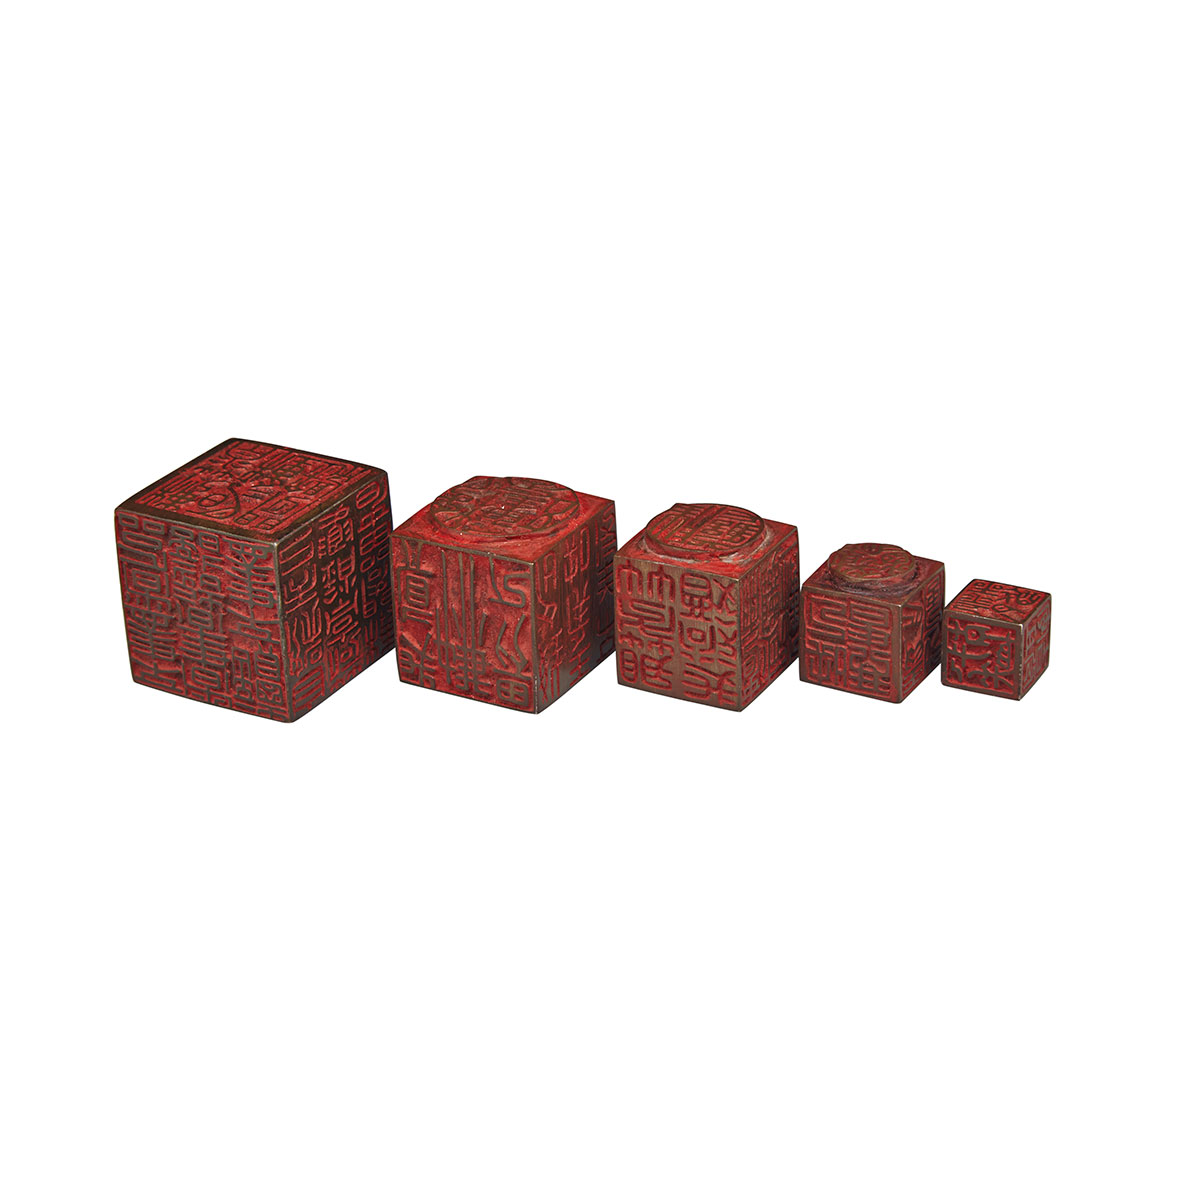 Unusual Bronze Five-Piece Nesting Seal Set, Late Qing Dynasty